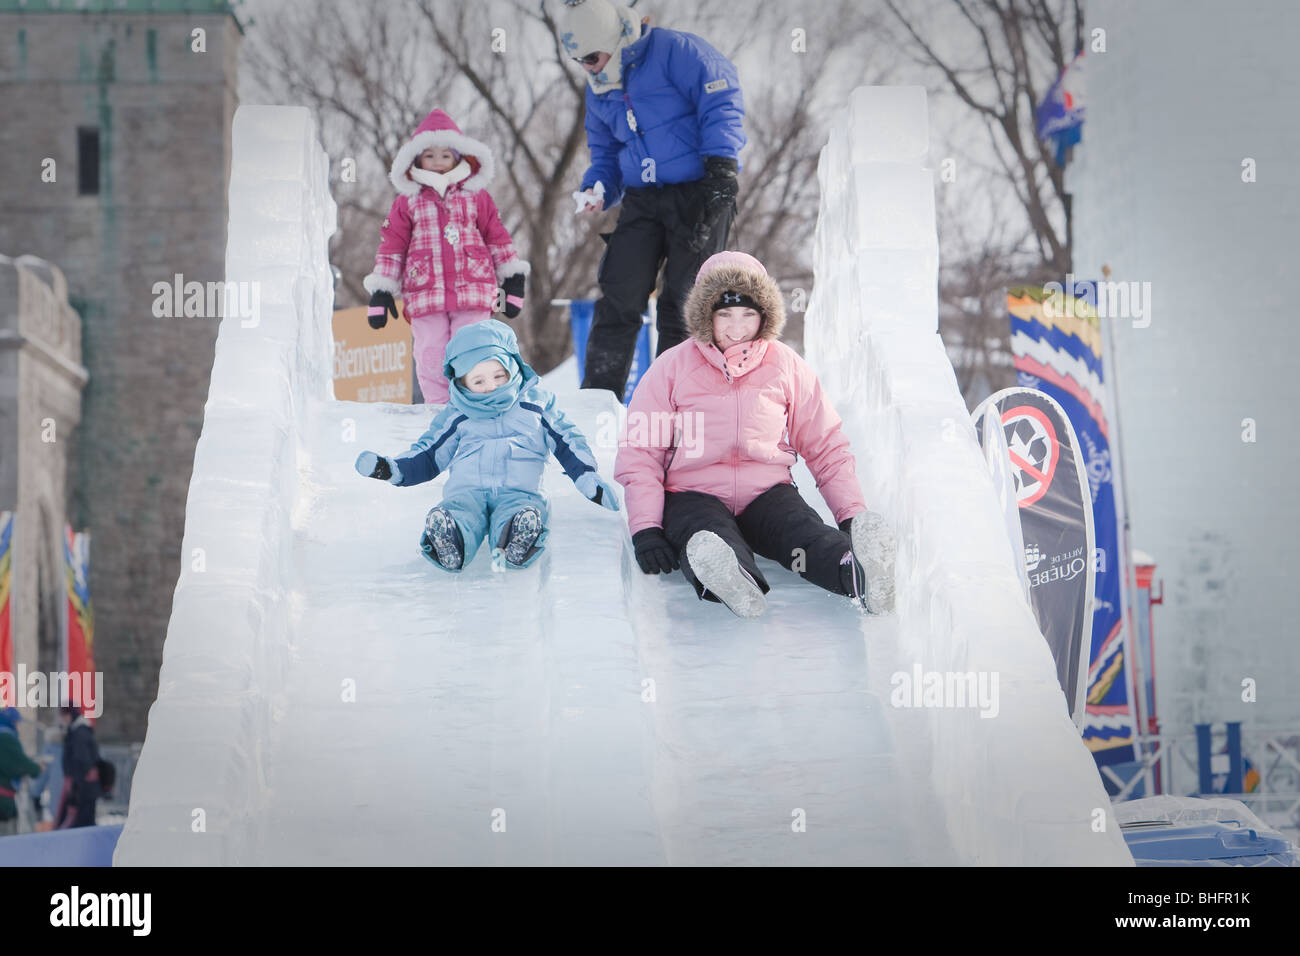 A woman and her daughter ride an ice slide at the Quebec Winter Carnival (Carnaval de Quebec) in Quebec city, Stock Photo